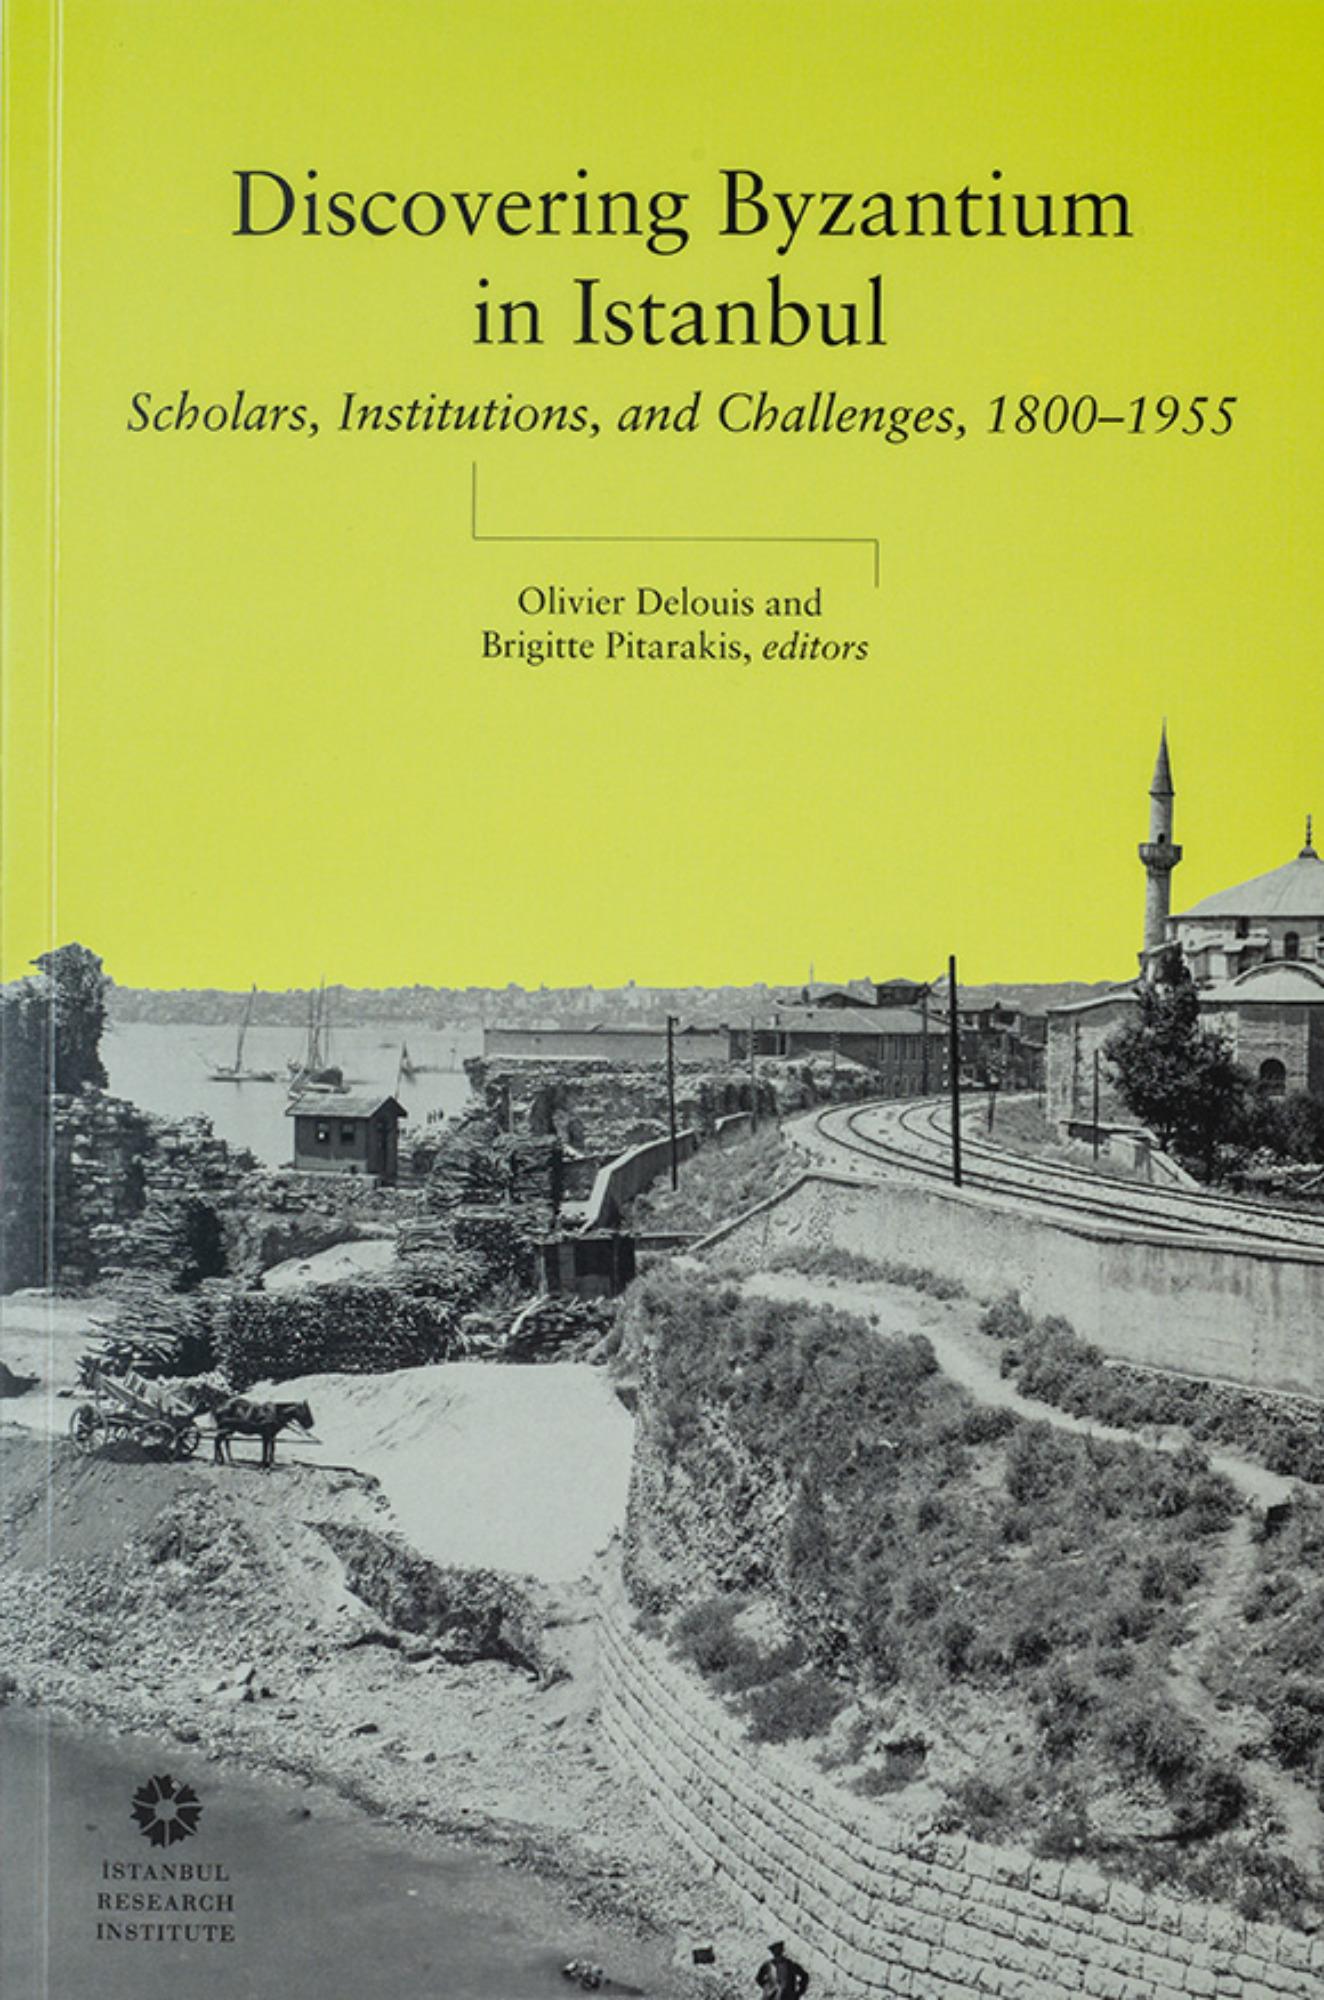 Delouis, Olivier – Brigitte Pitarakis :  Discovering Byzantium in Istanbul. Scholars, Institutions, and Challenges, 1800–1955